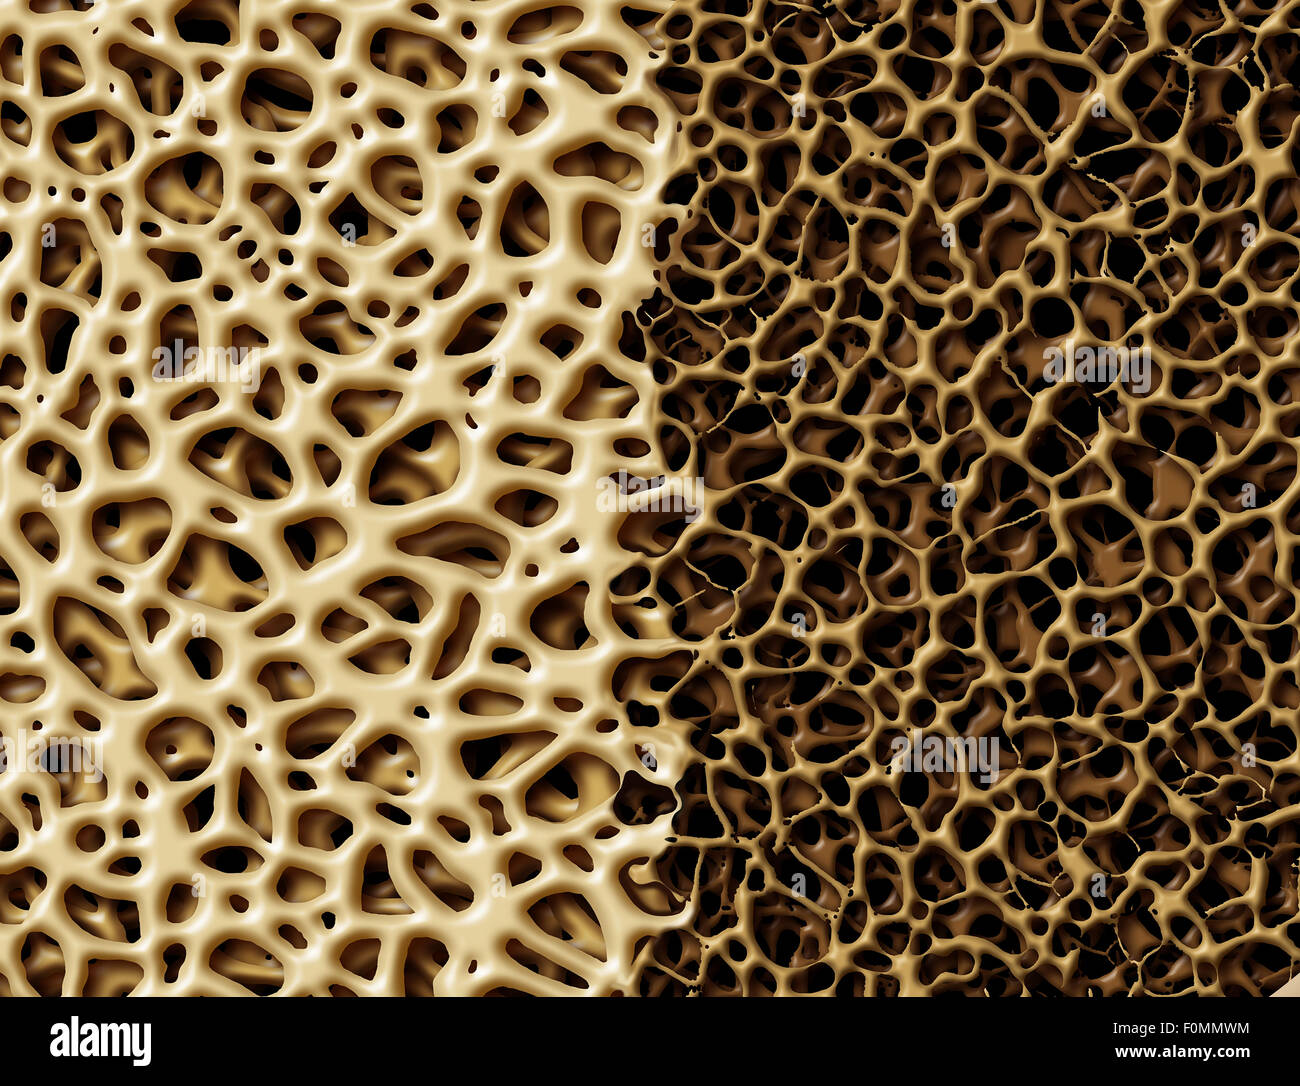 Bone with osteoperosis medical anatomy concept as a strong healthy and normal spongy tissue against unhealthy porous weak skeleton structure due to aging or illness. Stock Photo